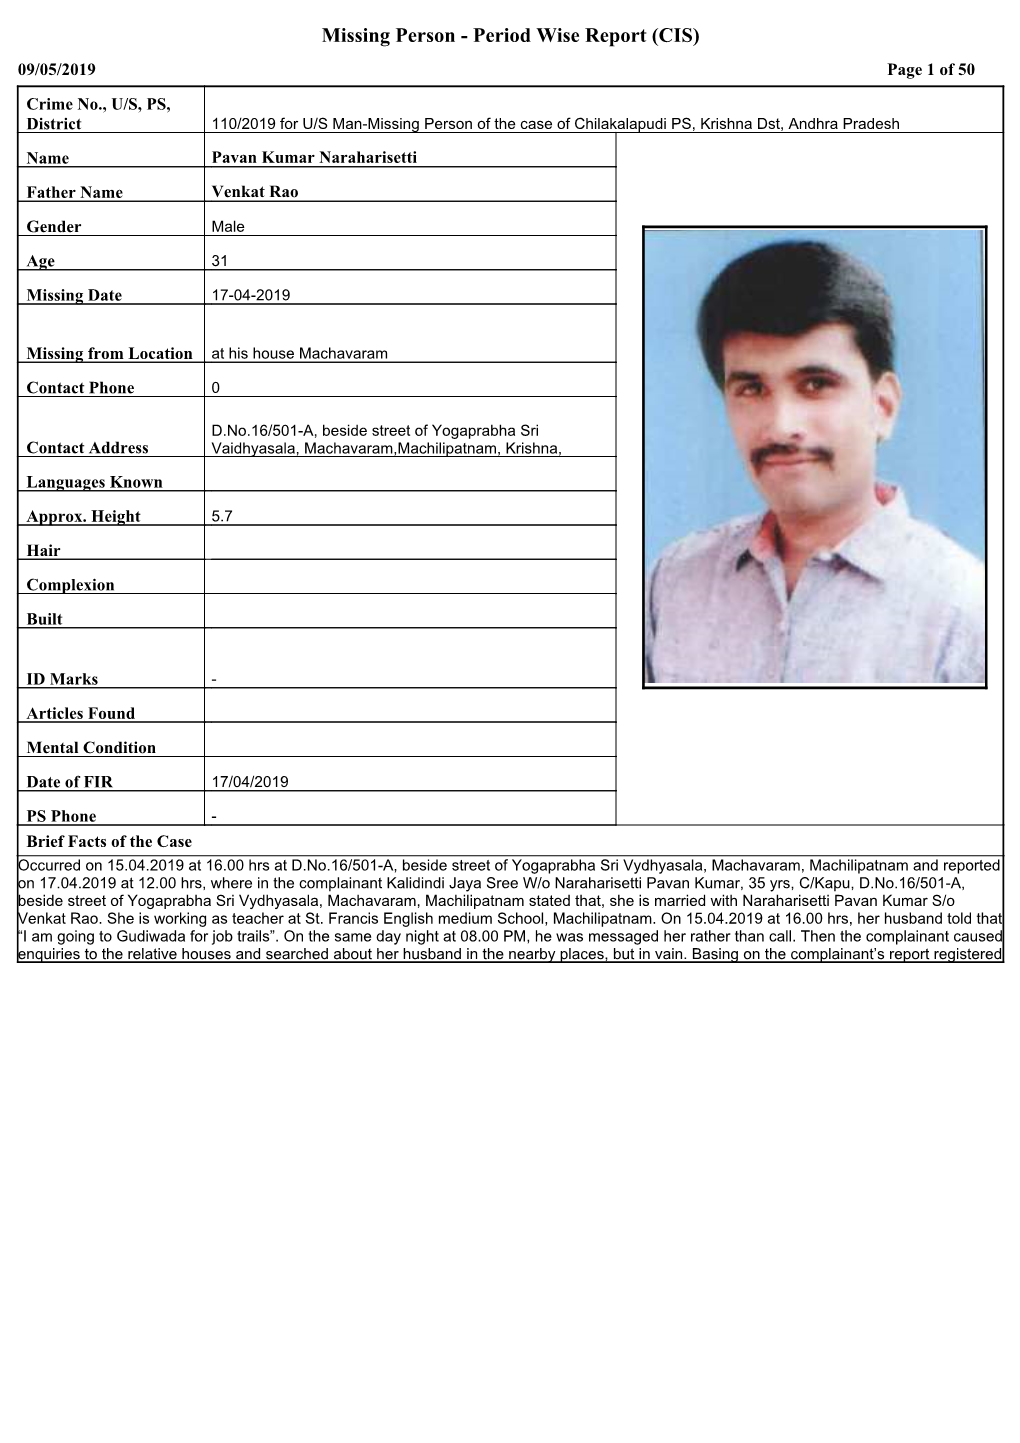 Missing Person - Period Wise Report (CIS) 09/05/2019 Page 1 of 50